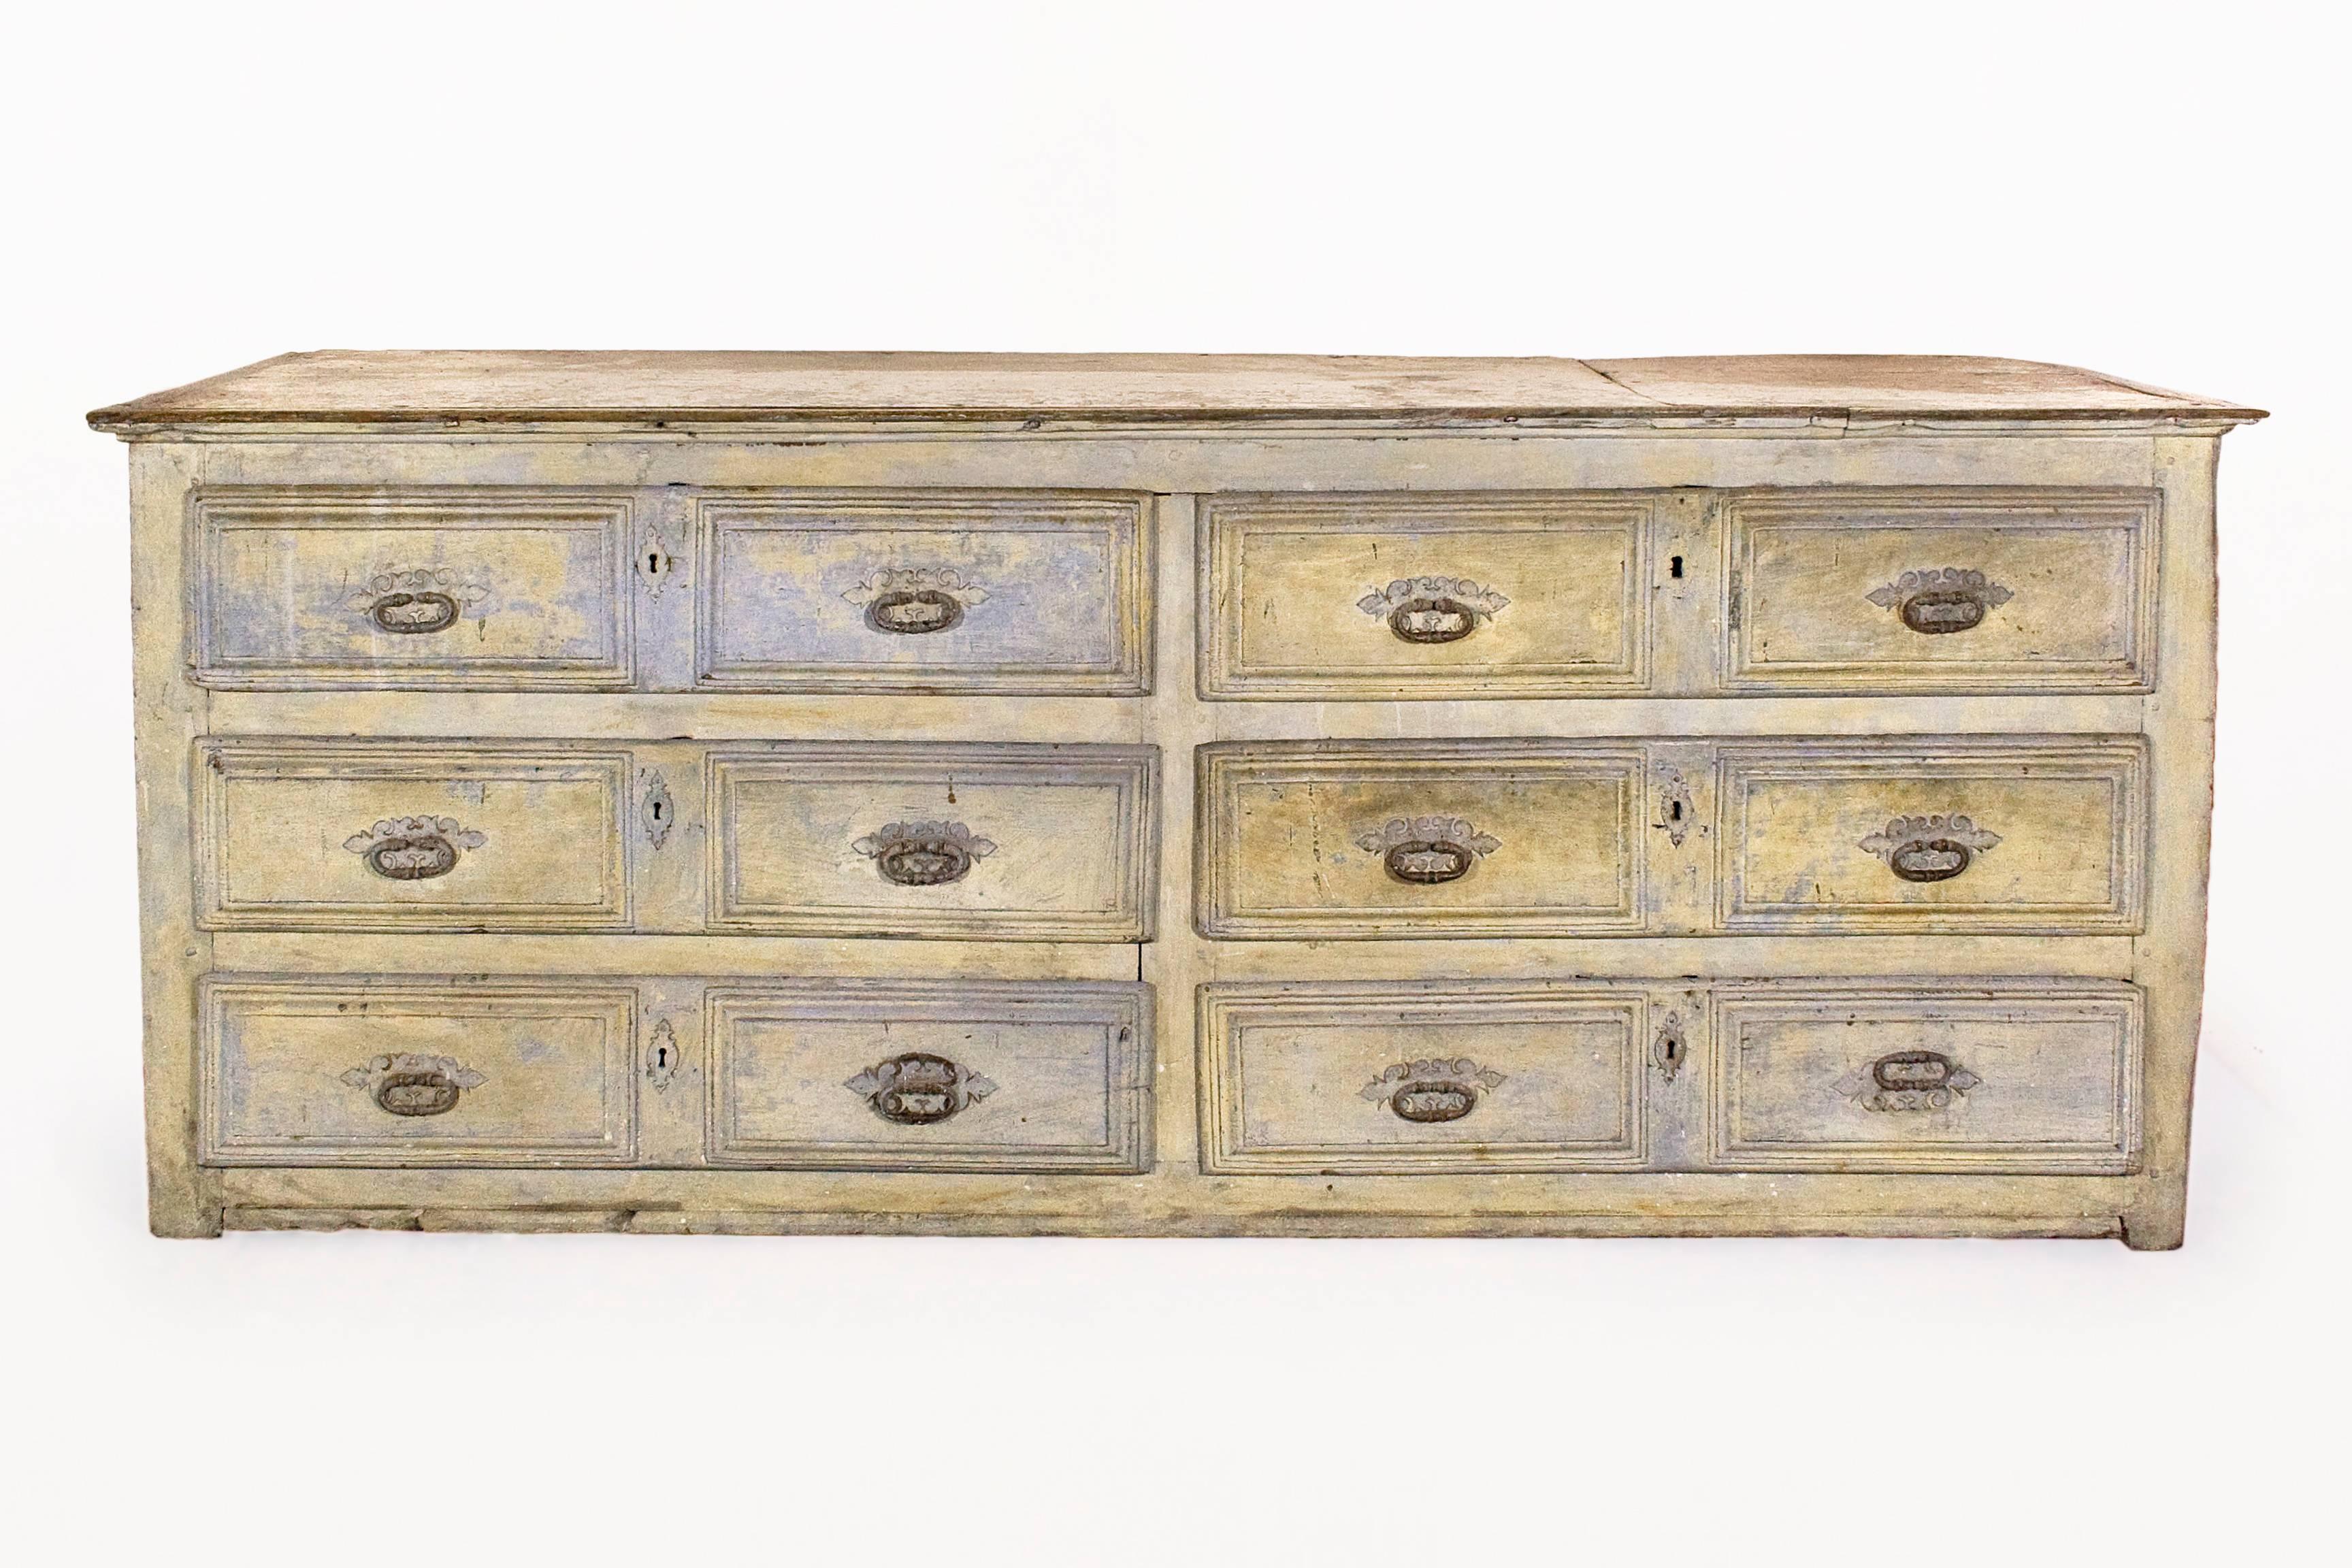 Extra large late 17th century Tuscany sideboard
Original paint
Six drawers
Exceptional piece
circa 1600s, Italy
Antique condition.